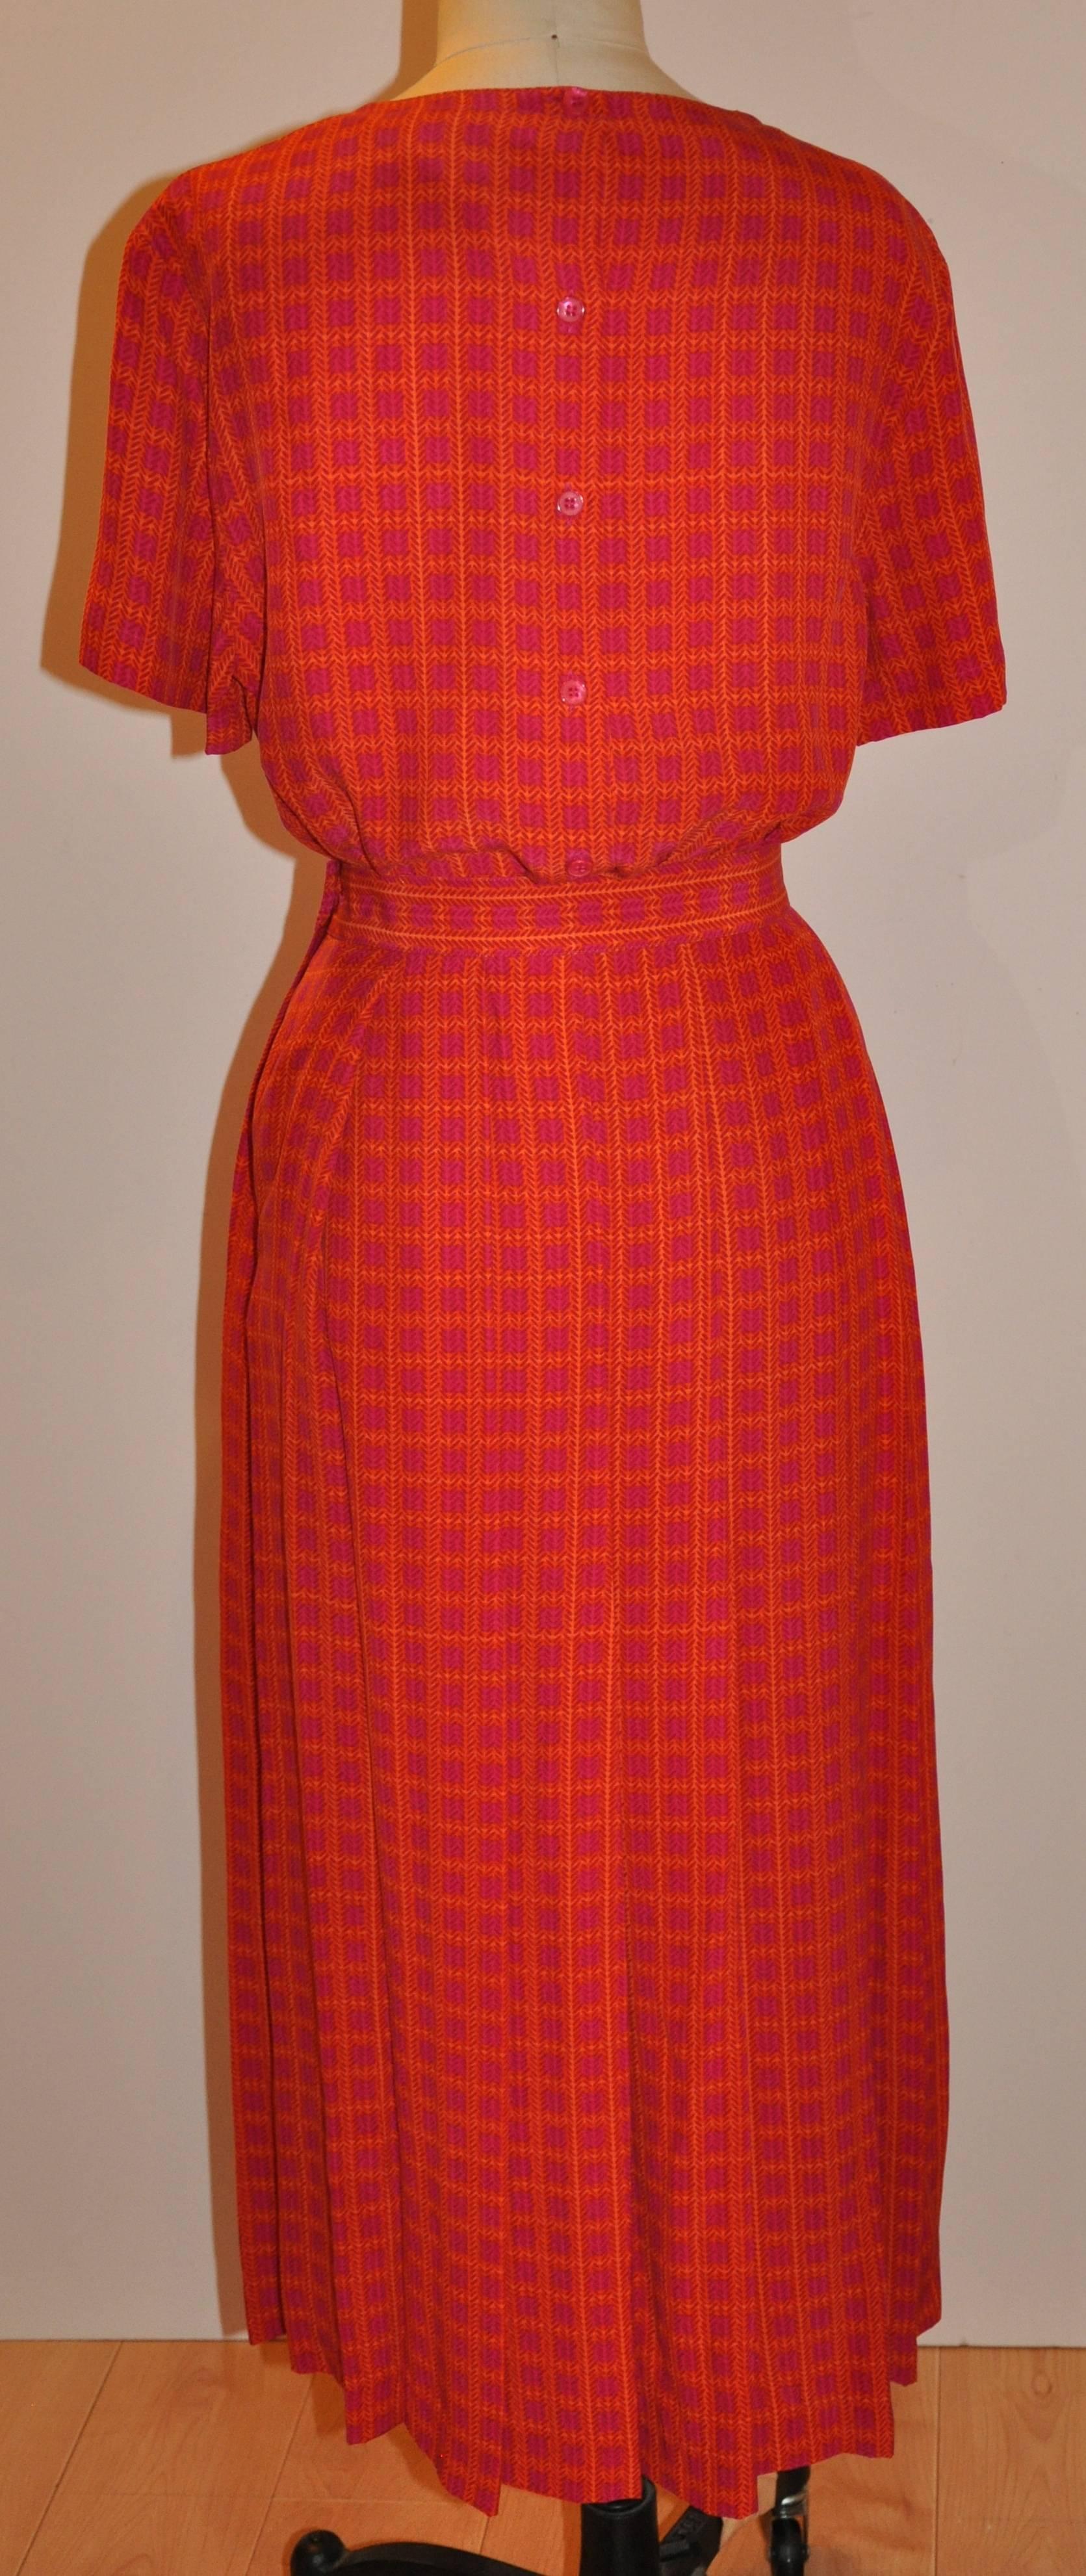 Liz Claiborne "Collection" wonderful combination of fuchsia & tangerine silk 2-piece ensemble makes for an elegant wear. The top measures 17" across the shoulder, length is 24 1/2", underarm circumference is 39",